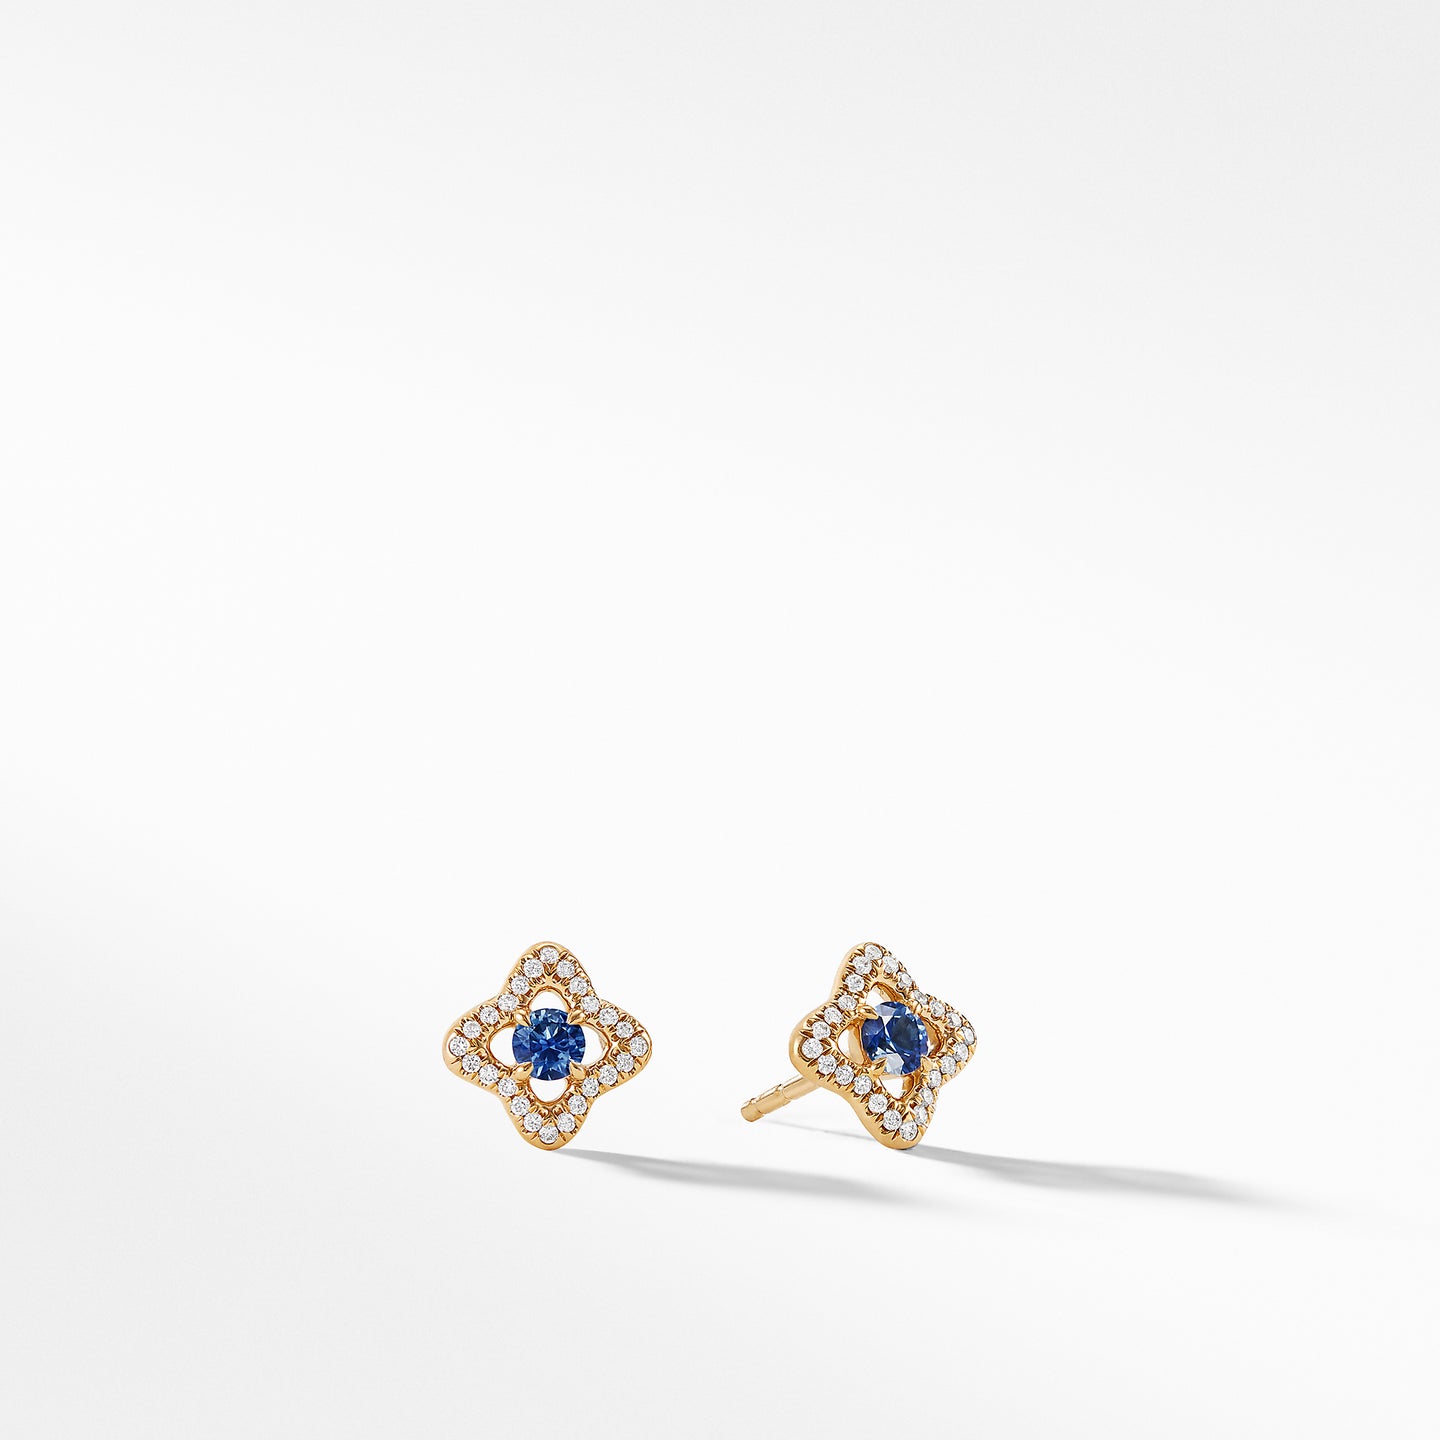 Earrings with Blue Sapphires and Diamonds in 18K Gold